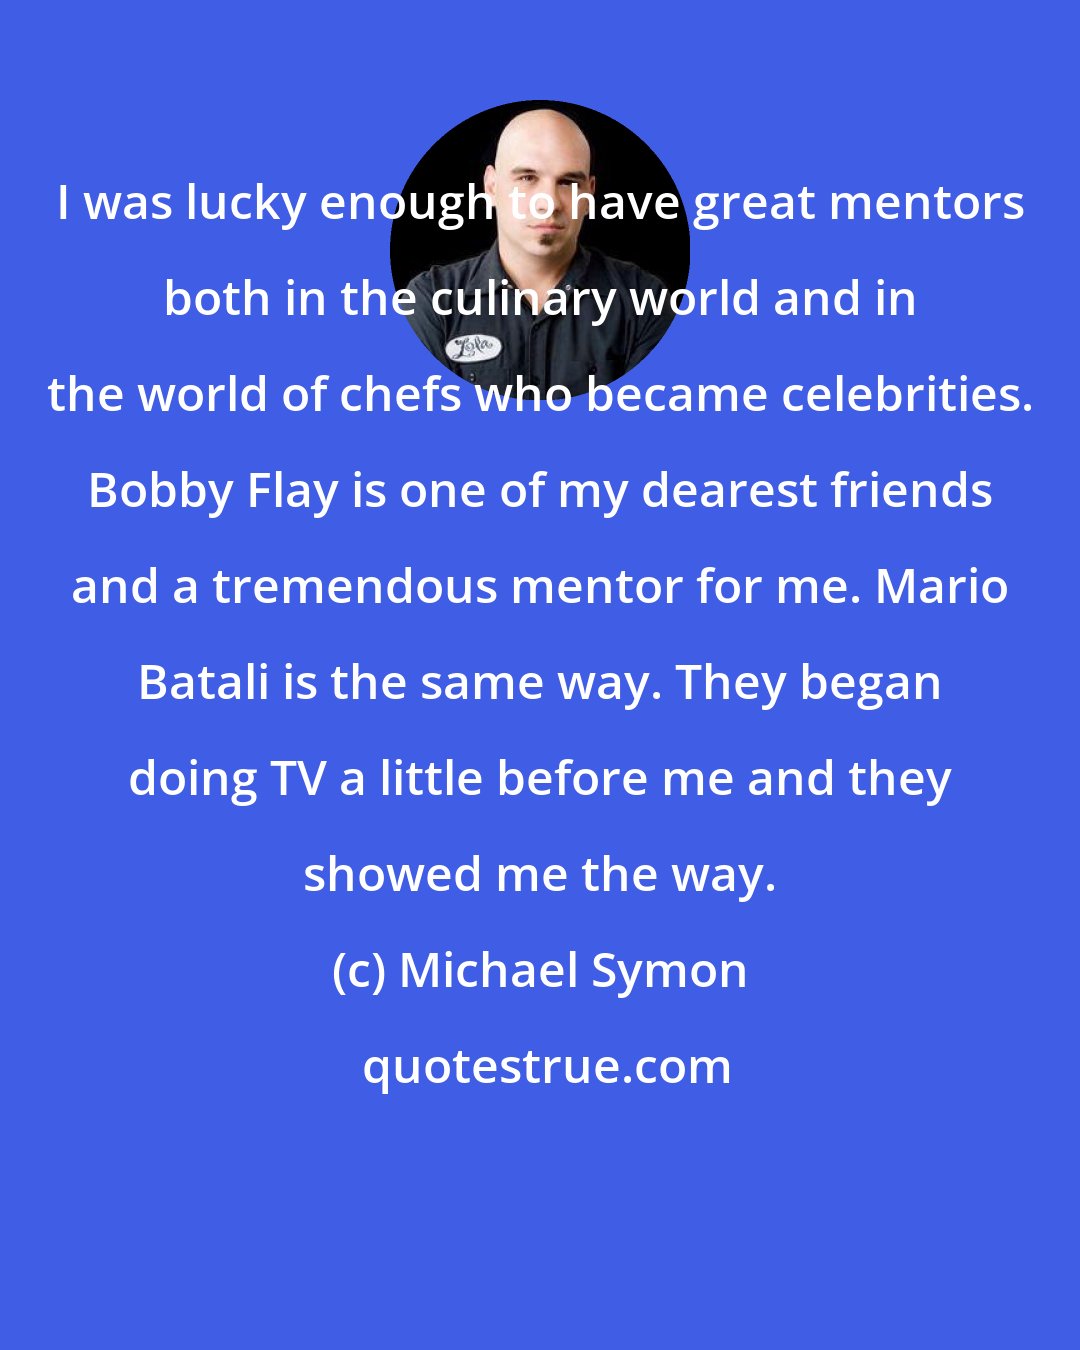 Michael Symon: I was lucky enough to have great mentors both in the culinary world and in the world of chefs who became celebrities. Bobby Flay is one of my dearest friends and a tremendous mentor for me. Mario Batali is the same way. They began doing TV a little before me and they showed me the way.